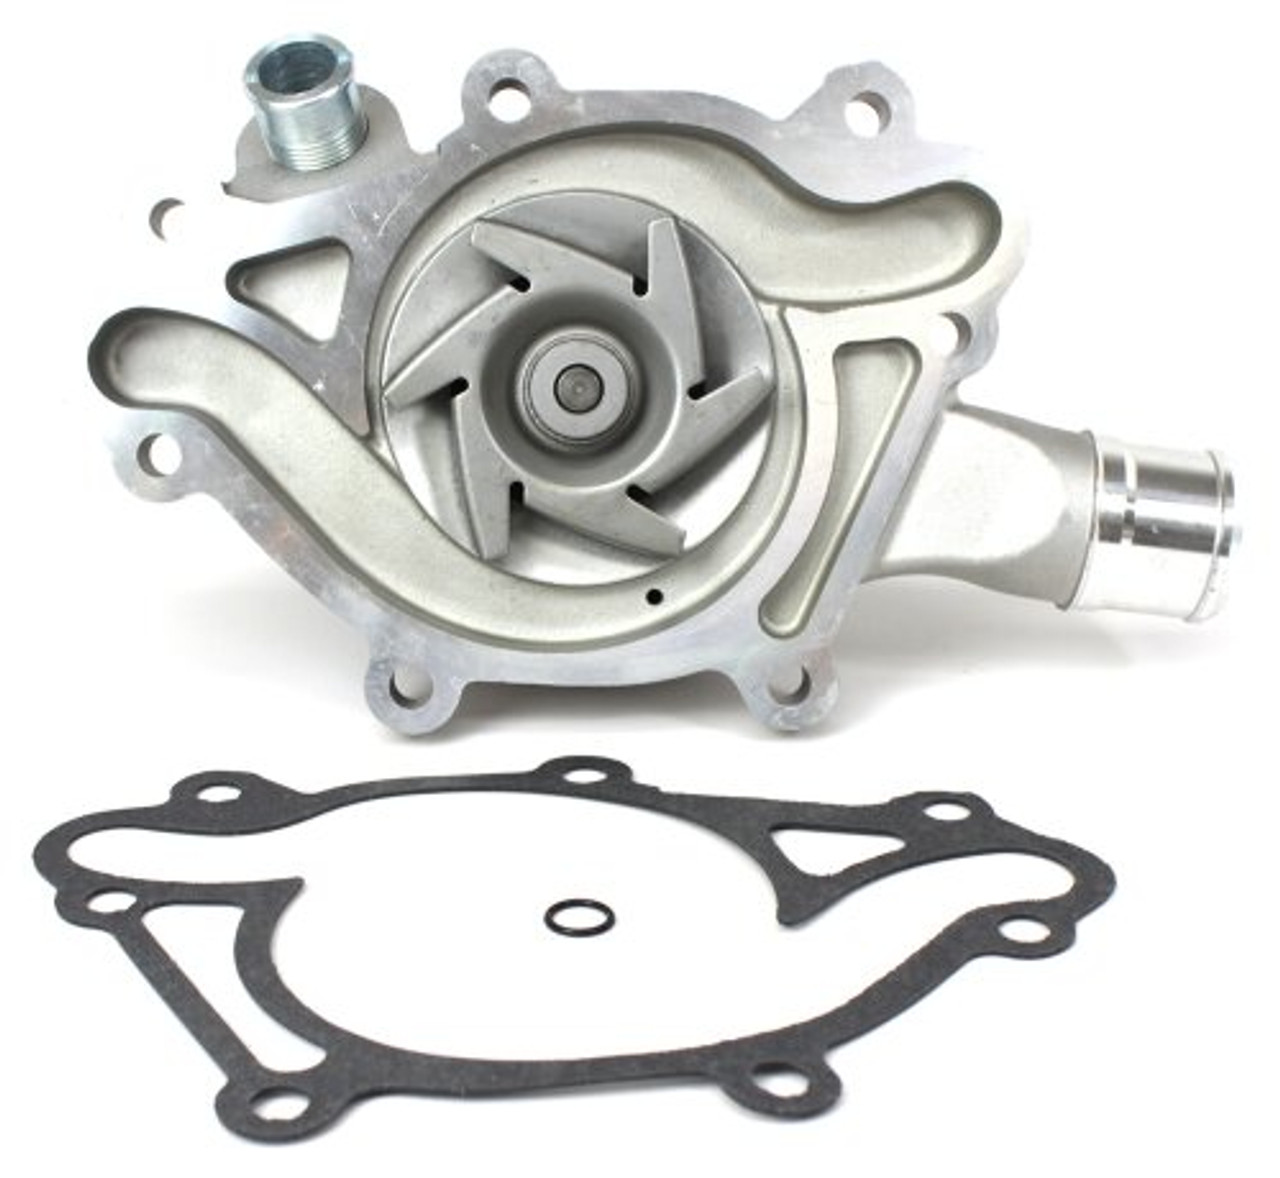 Water Pump - 1993 Jeep Grand Cherokee 5.2L Engine Parts # WP1130ZE174